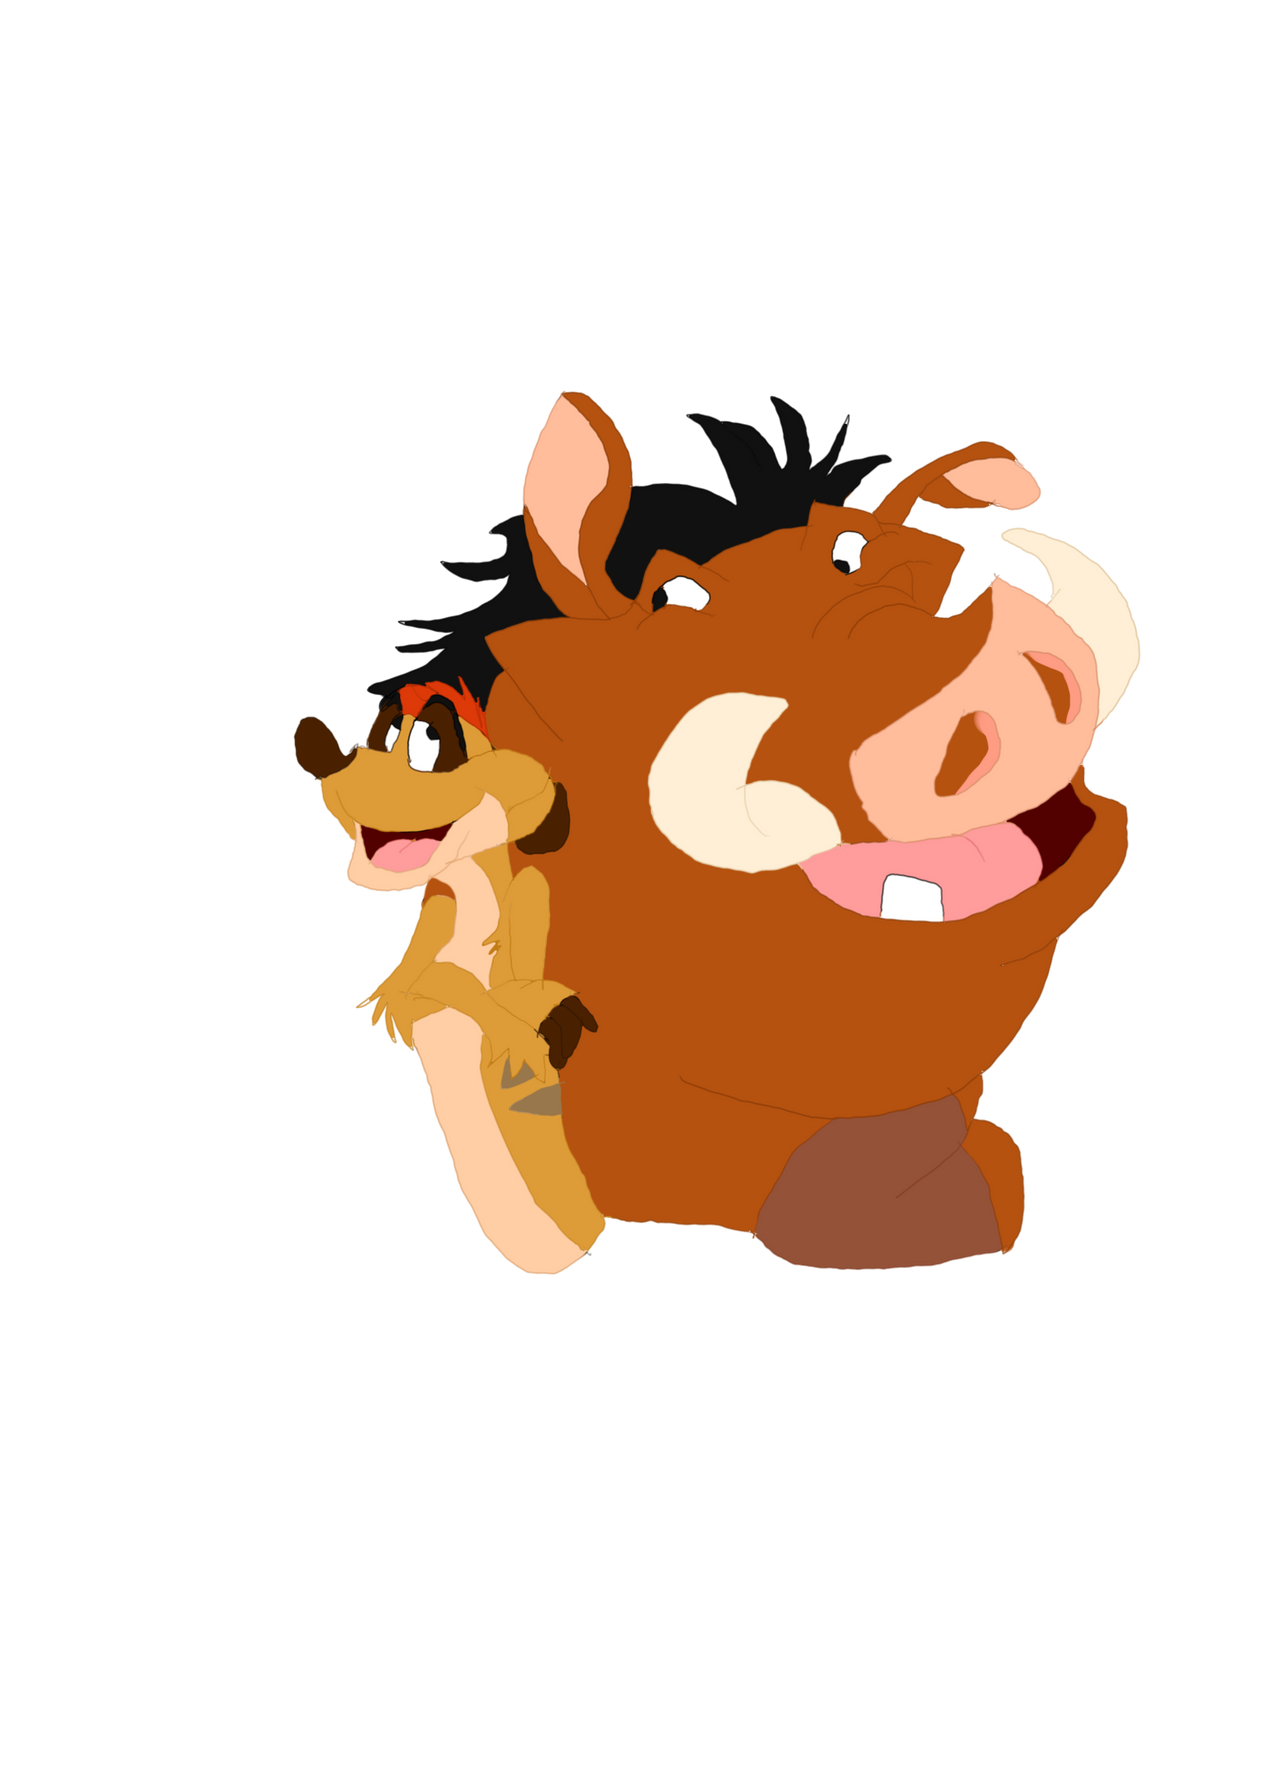 Timon and Pumbaa by Disneyfangirl774 on DeviantArt